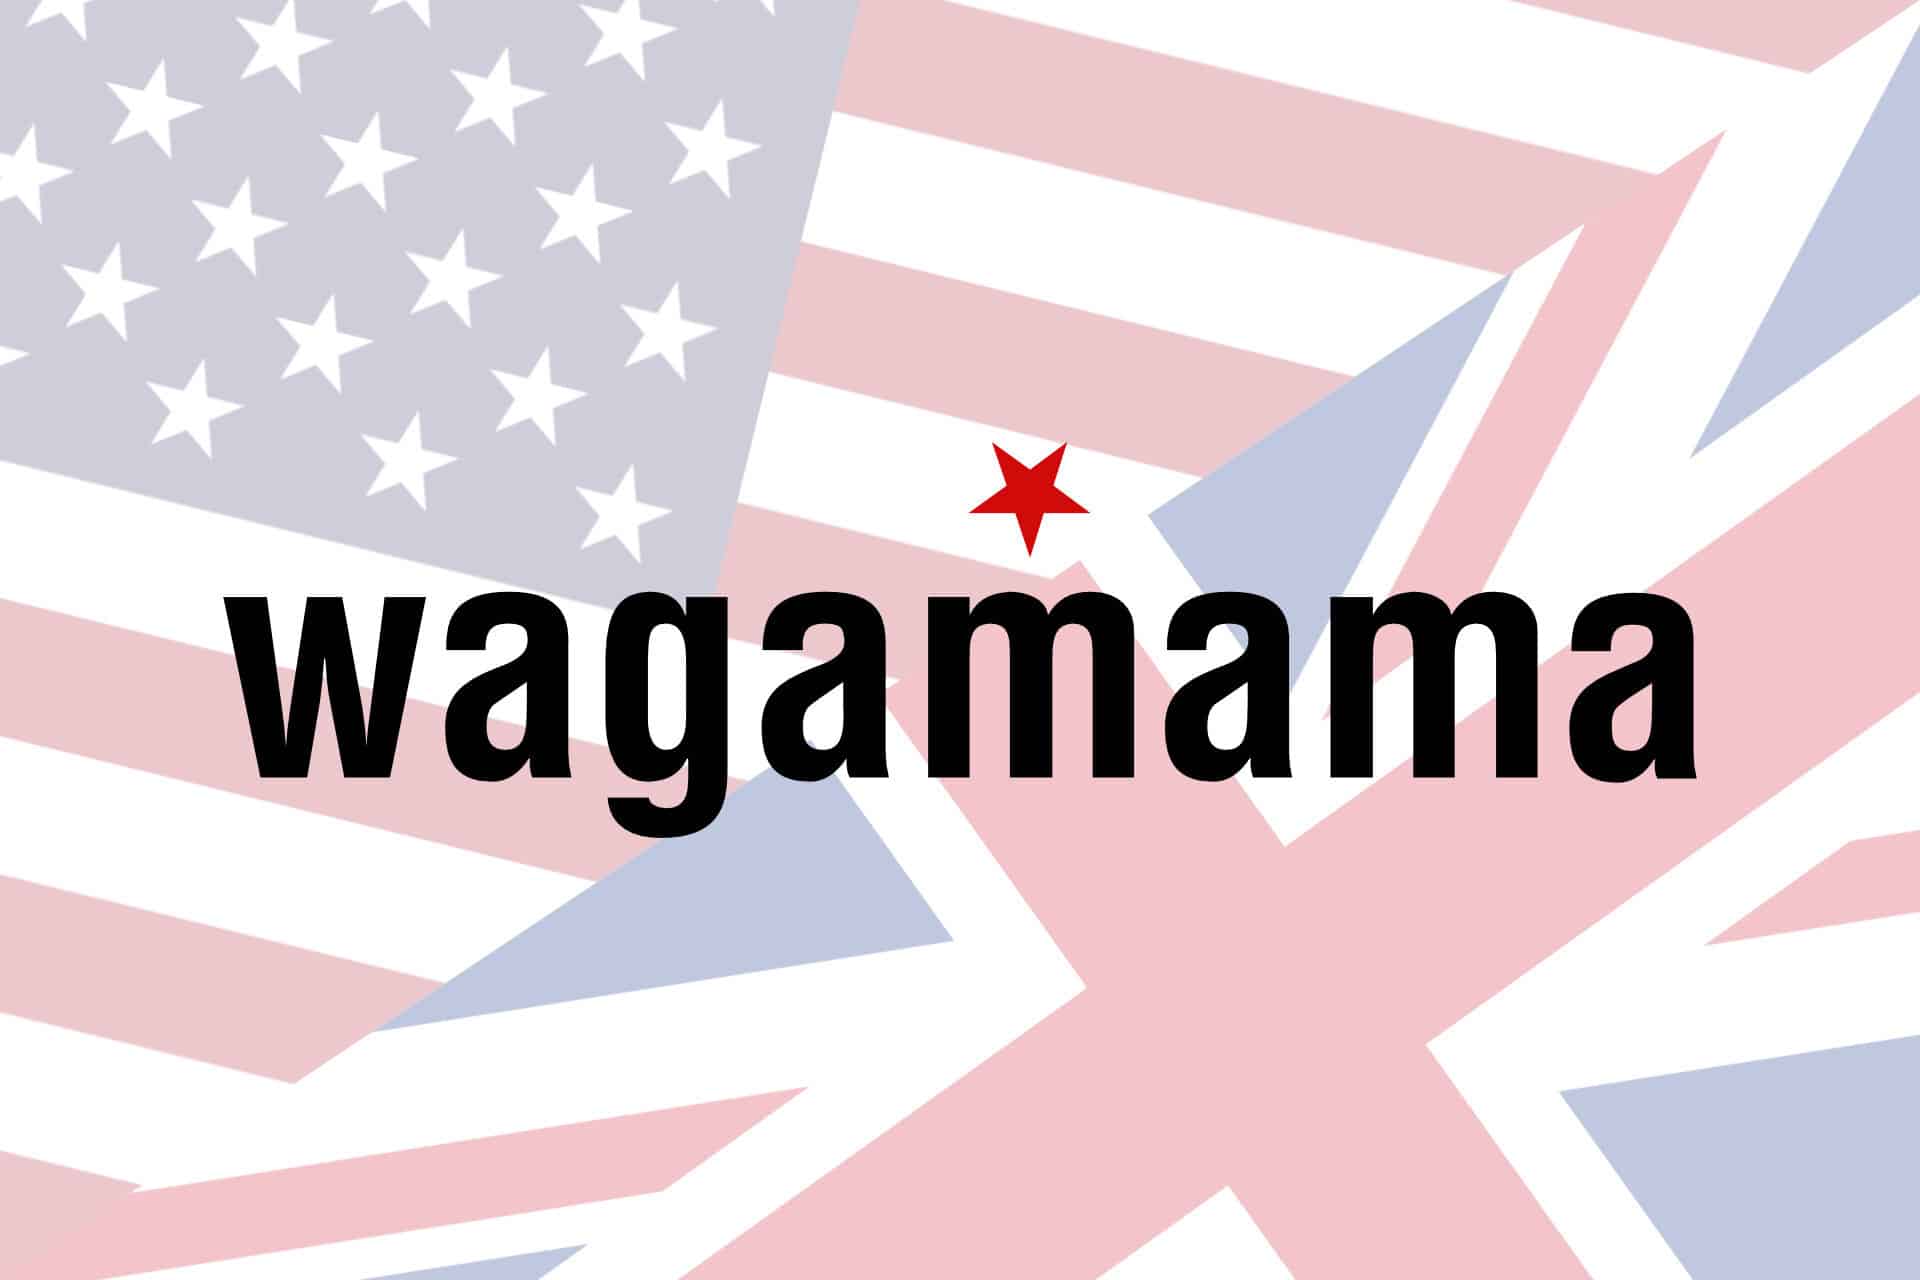 Wagamama logo over the US and UK flags